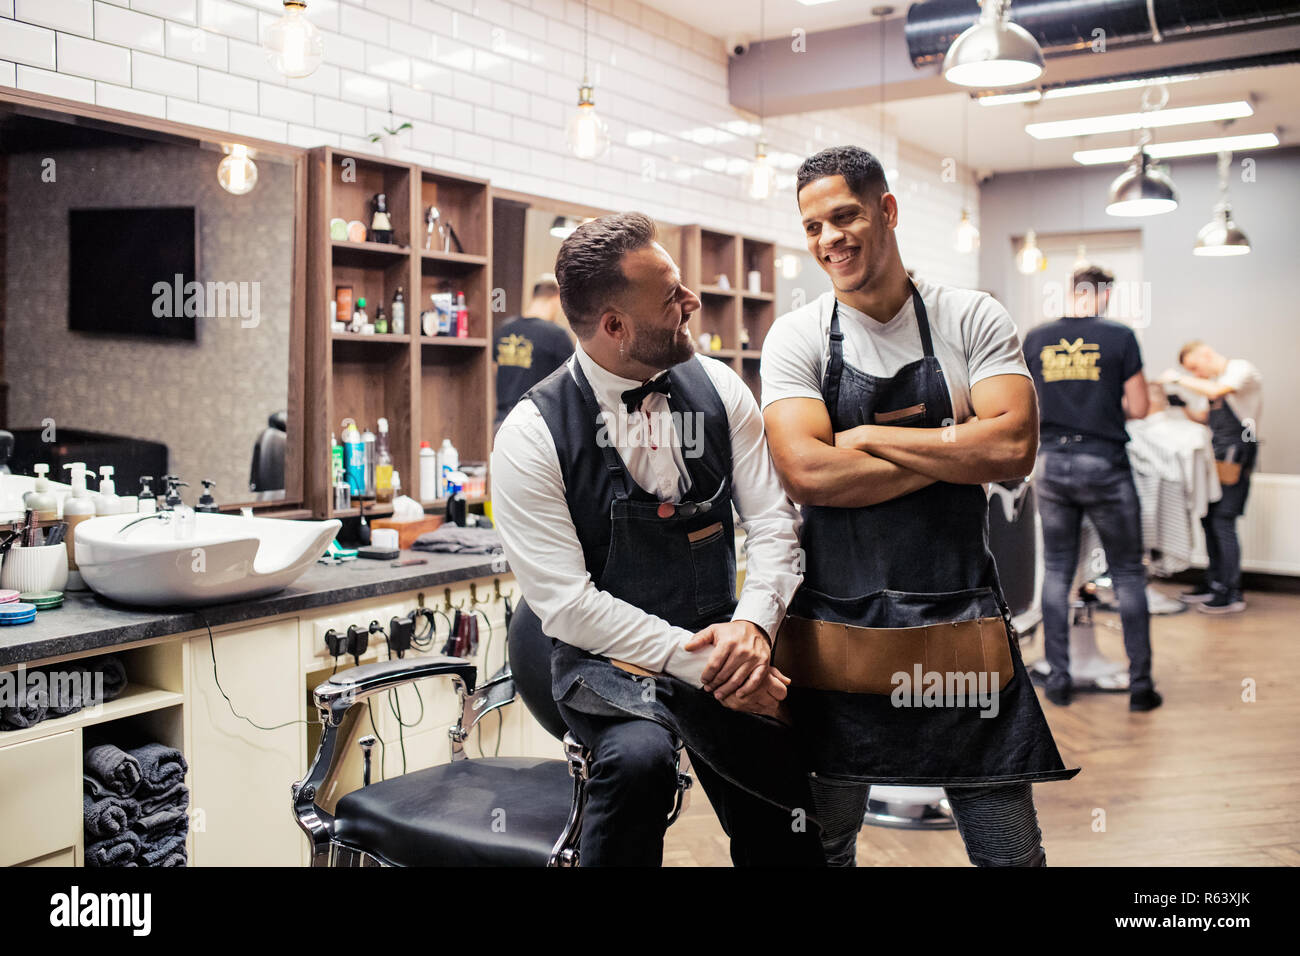 Two male haidressers and hairstylists sitting in barber shop. Stock Photo